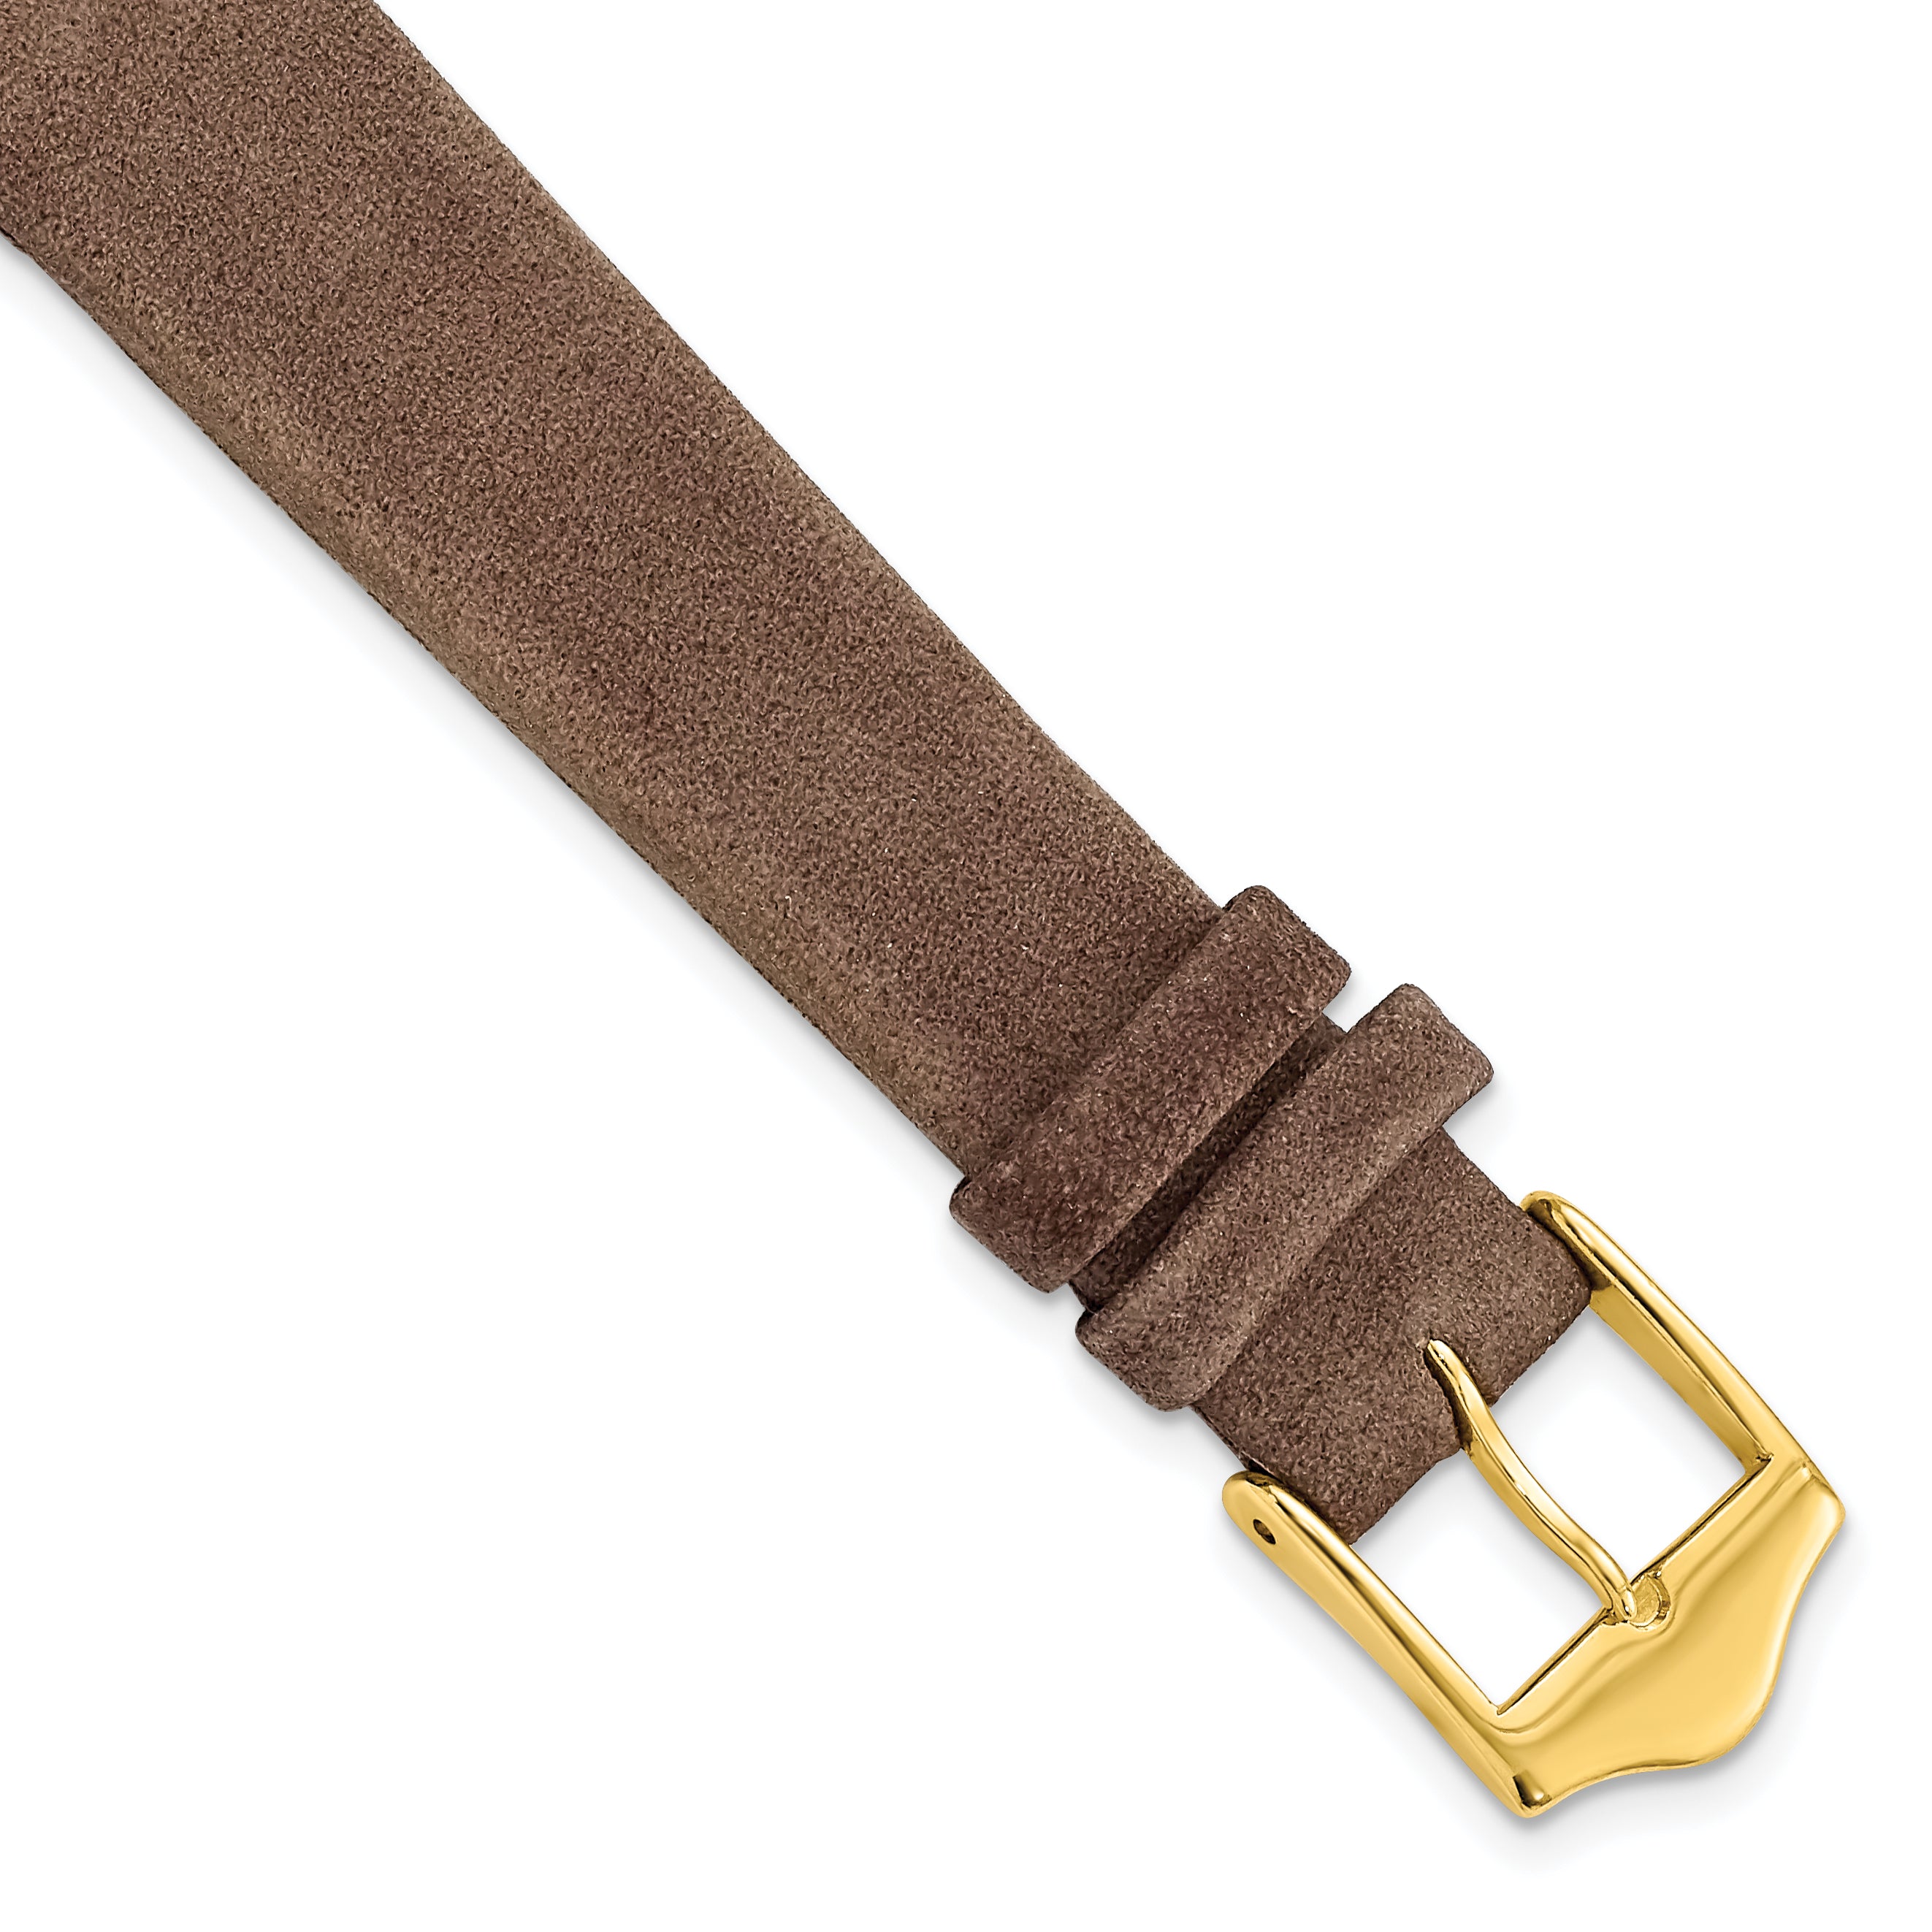 DeBeer 14mm Dark Brown Suede Flat Leather with Gold-tone Buckle 6.75 inch Watch Band